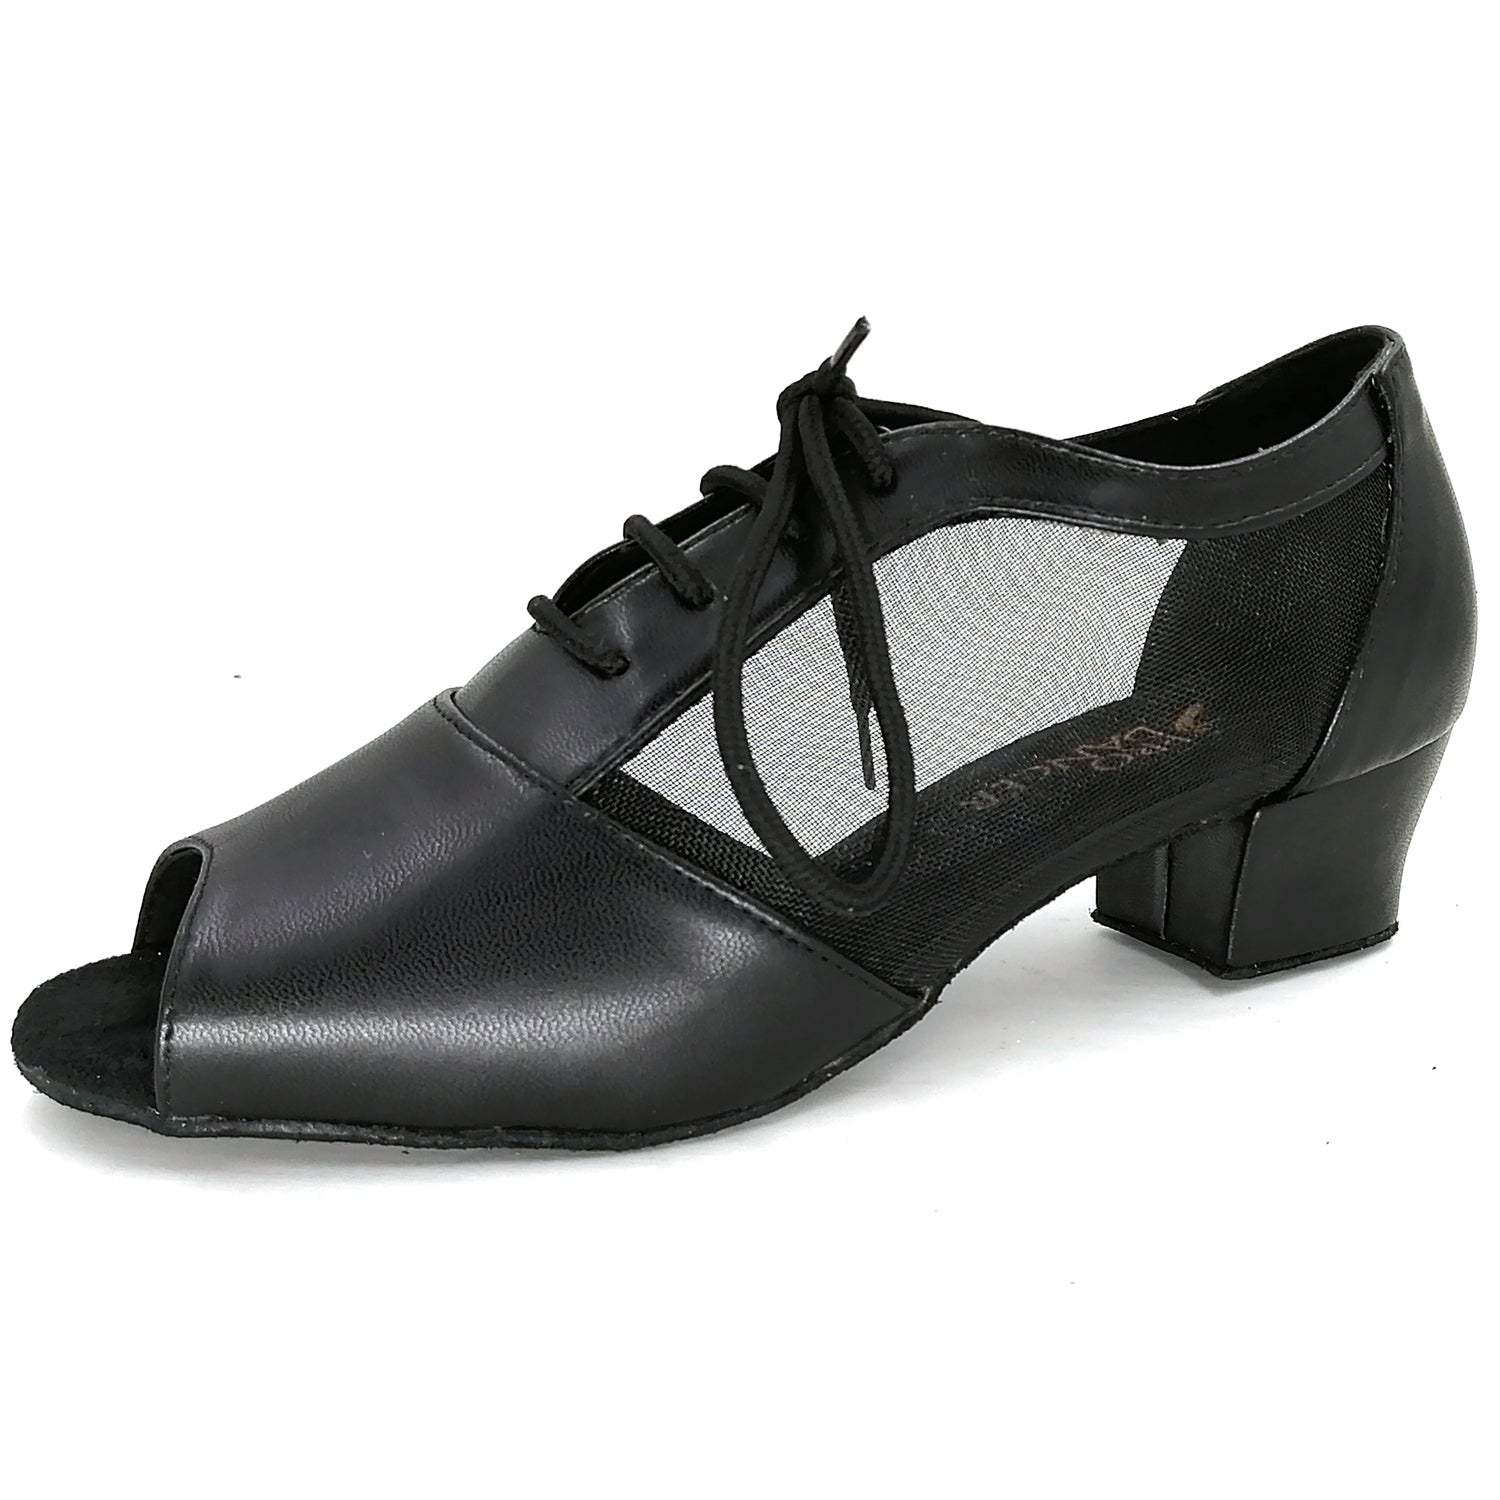 Women Ballroom Dancing Shoes with Suede Sole, Lace-up Peep-toe Design in Black for Tango Latin Practice (PD1141D)6